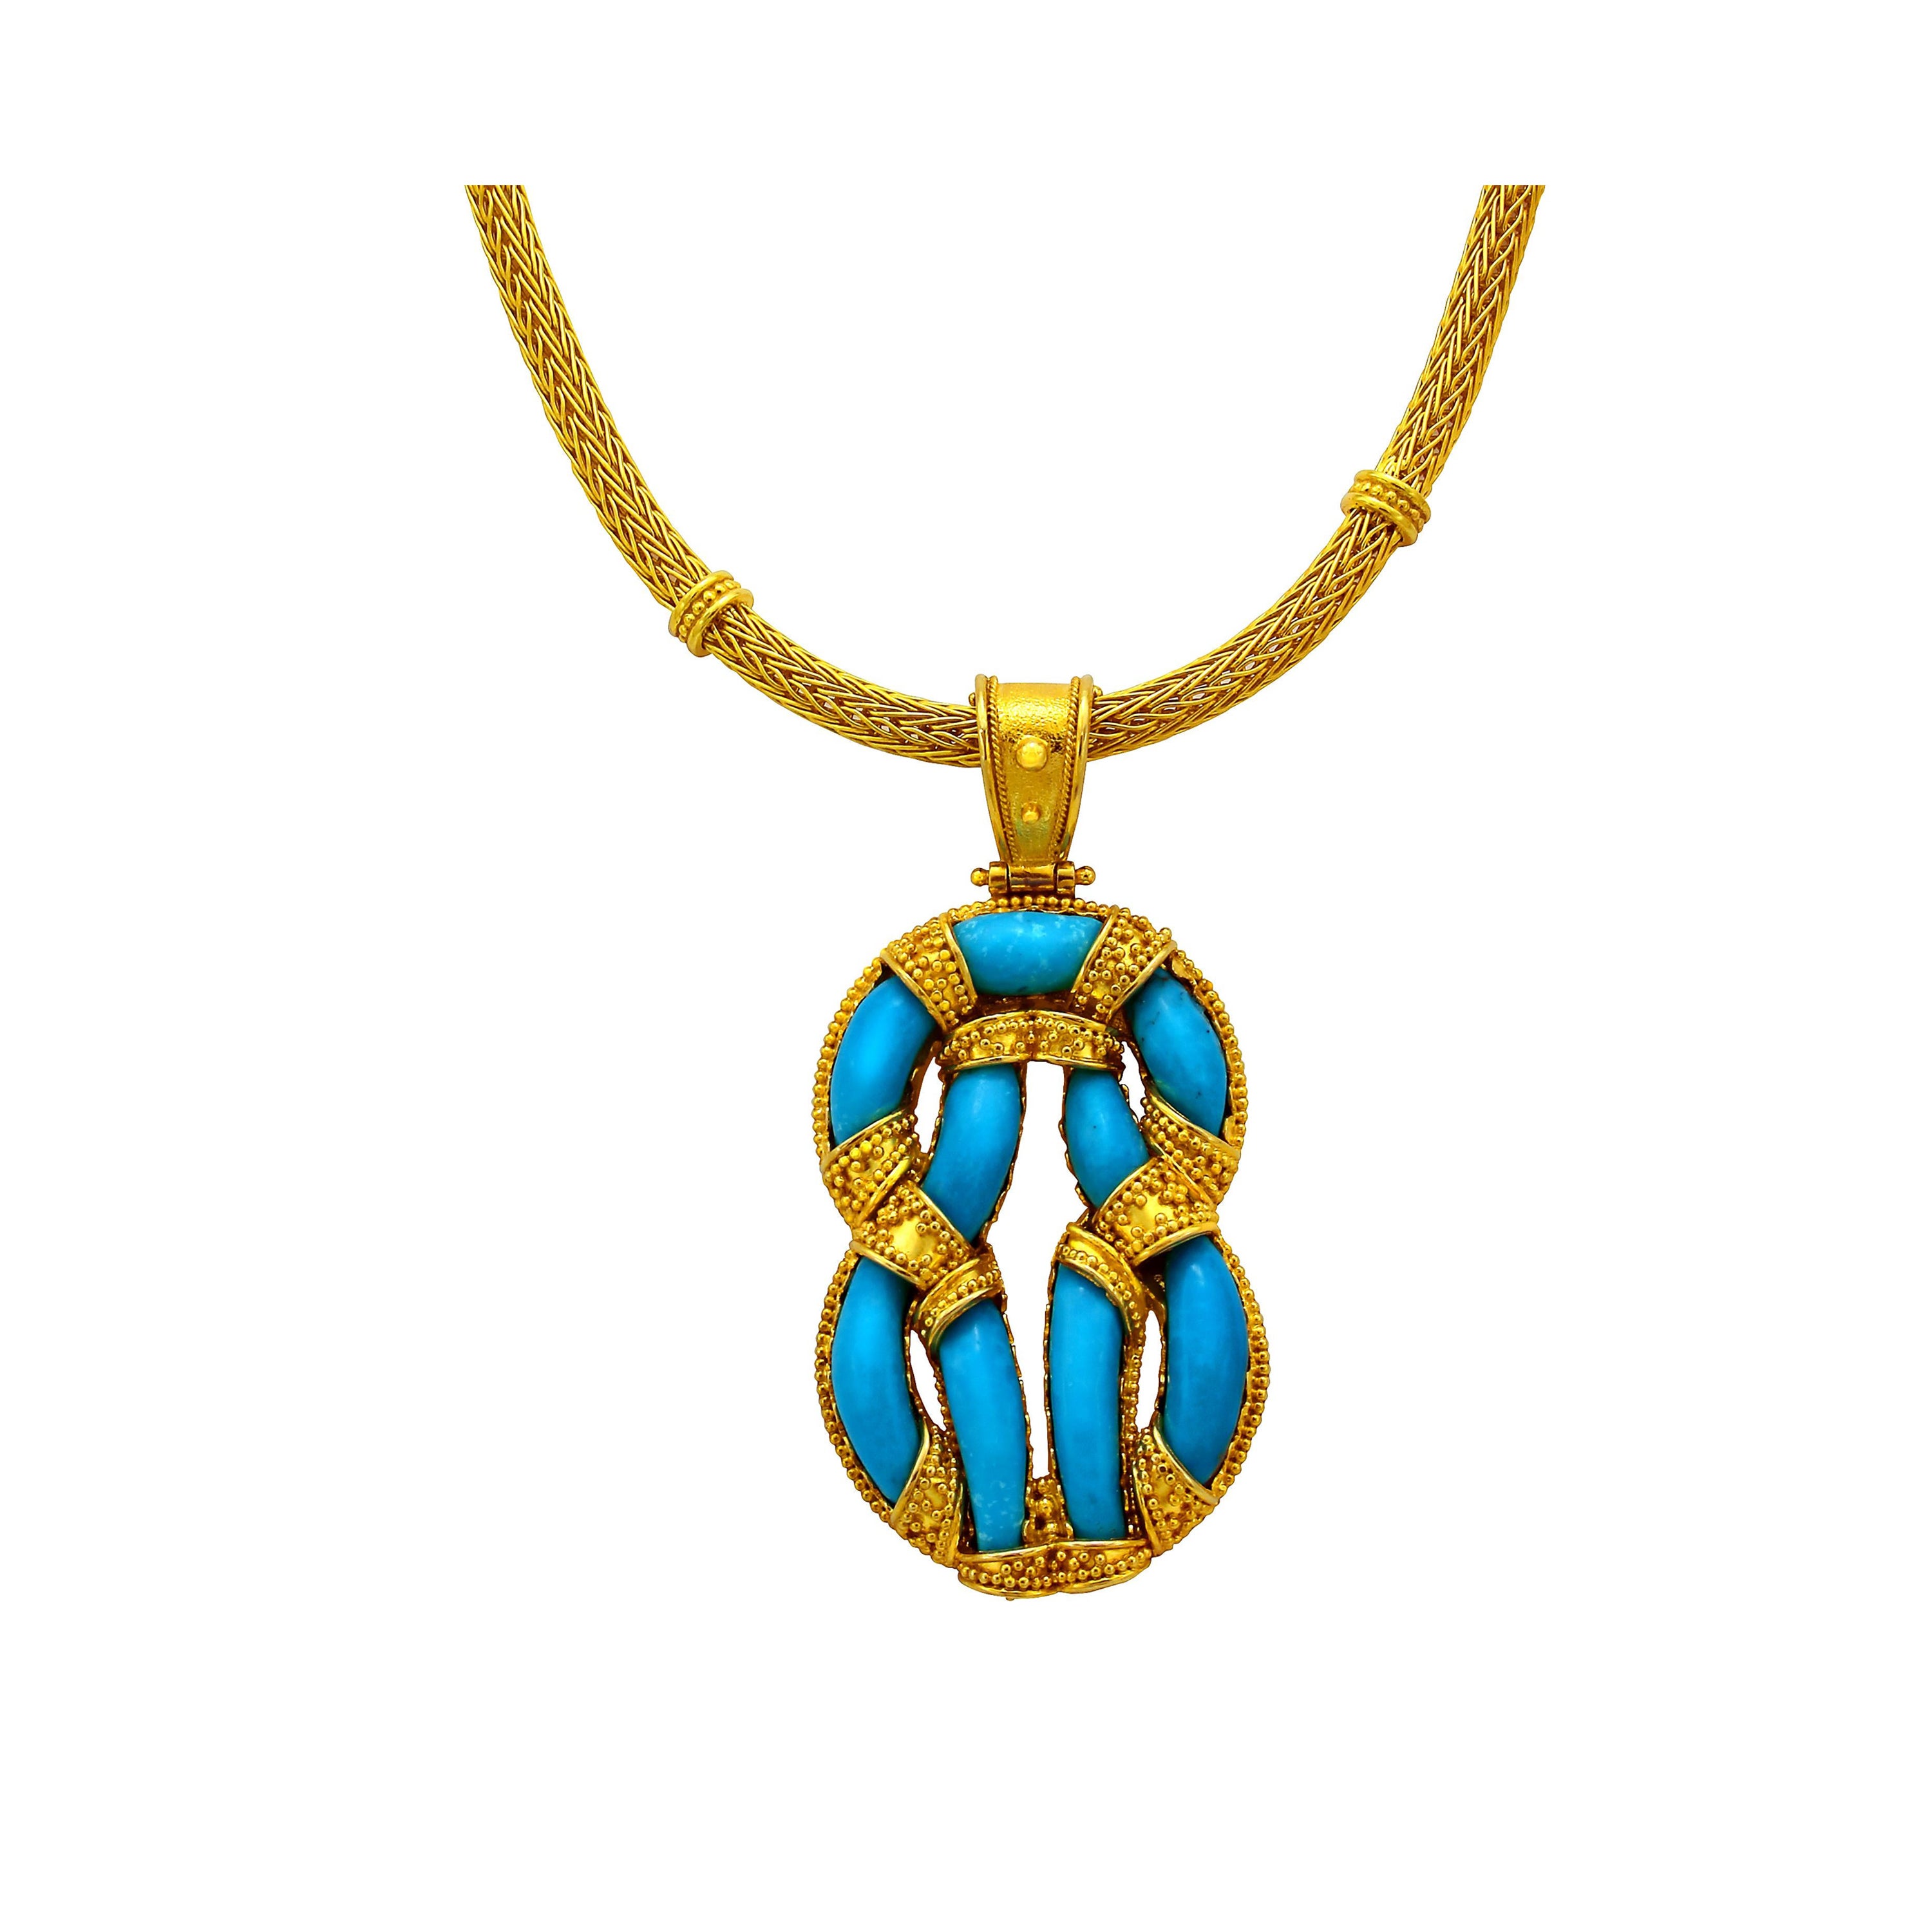 Dimos 18k Gold Knitted Necklace with Hercules Knot Pendant